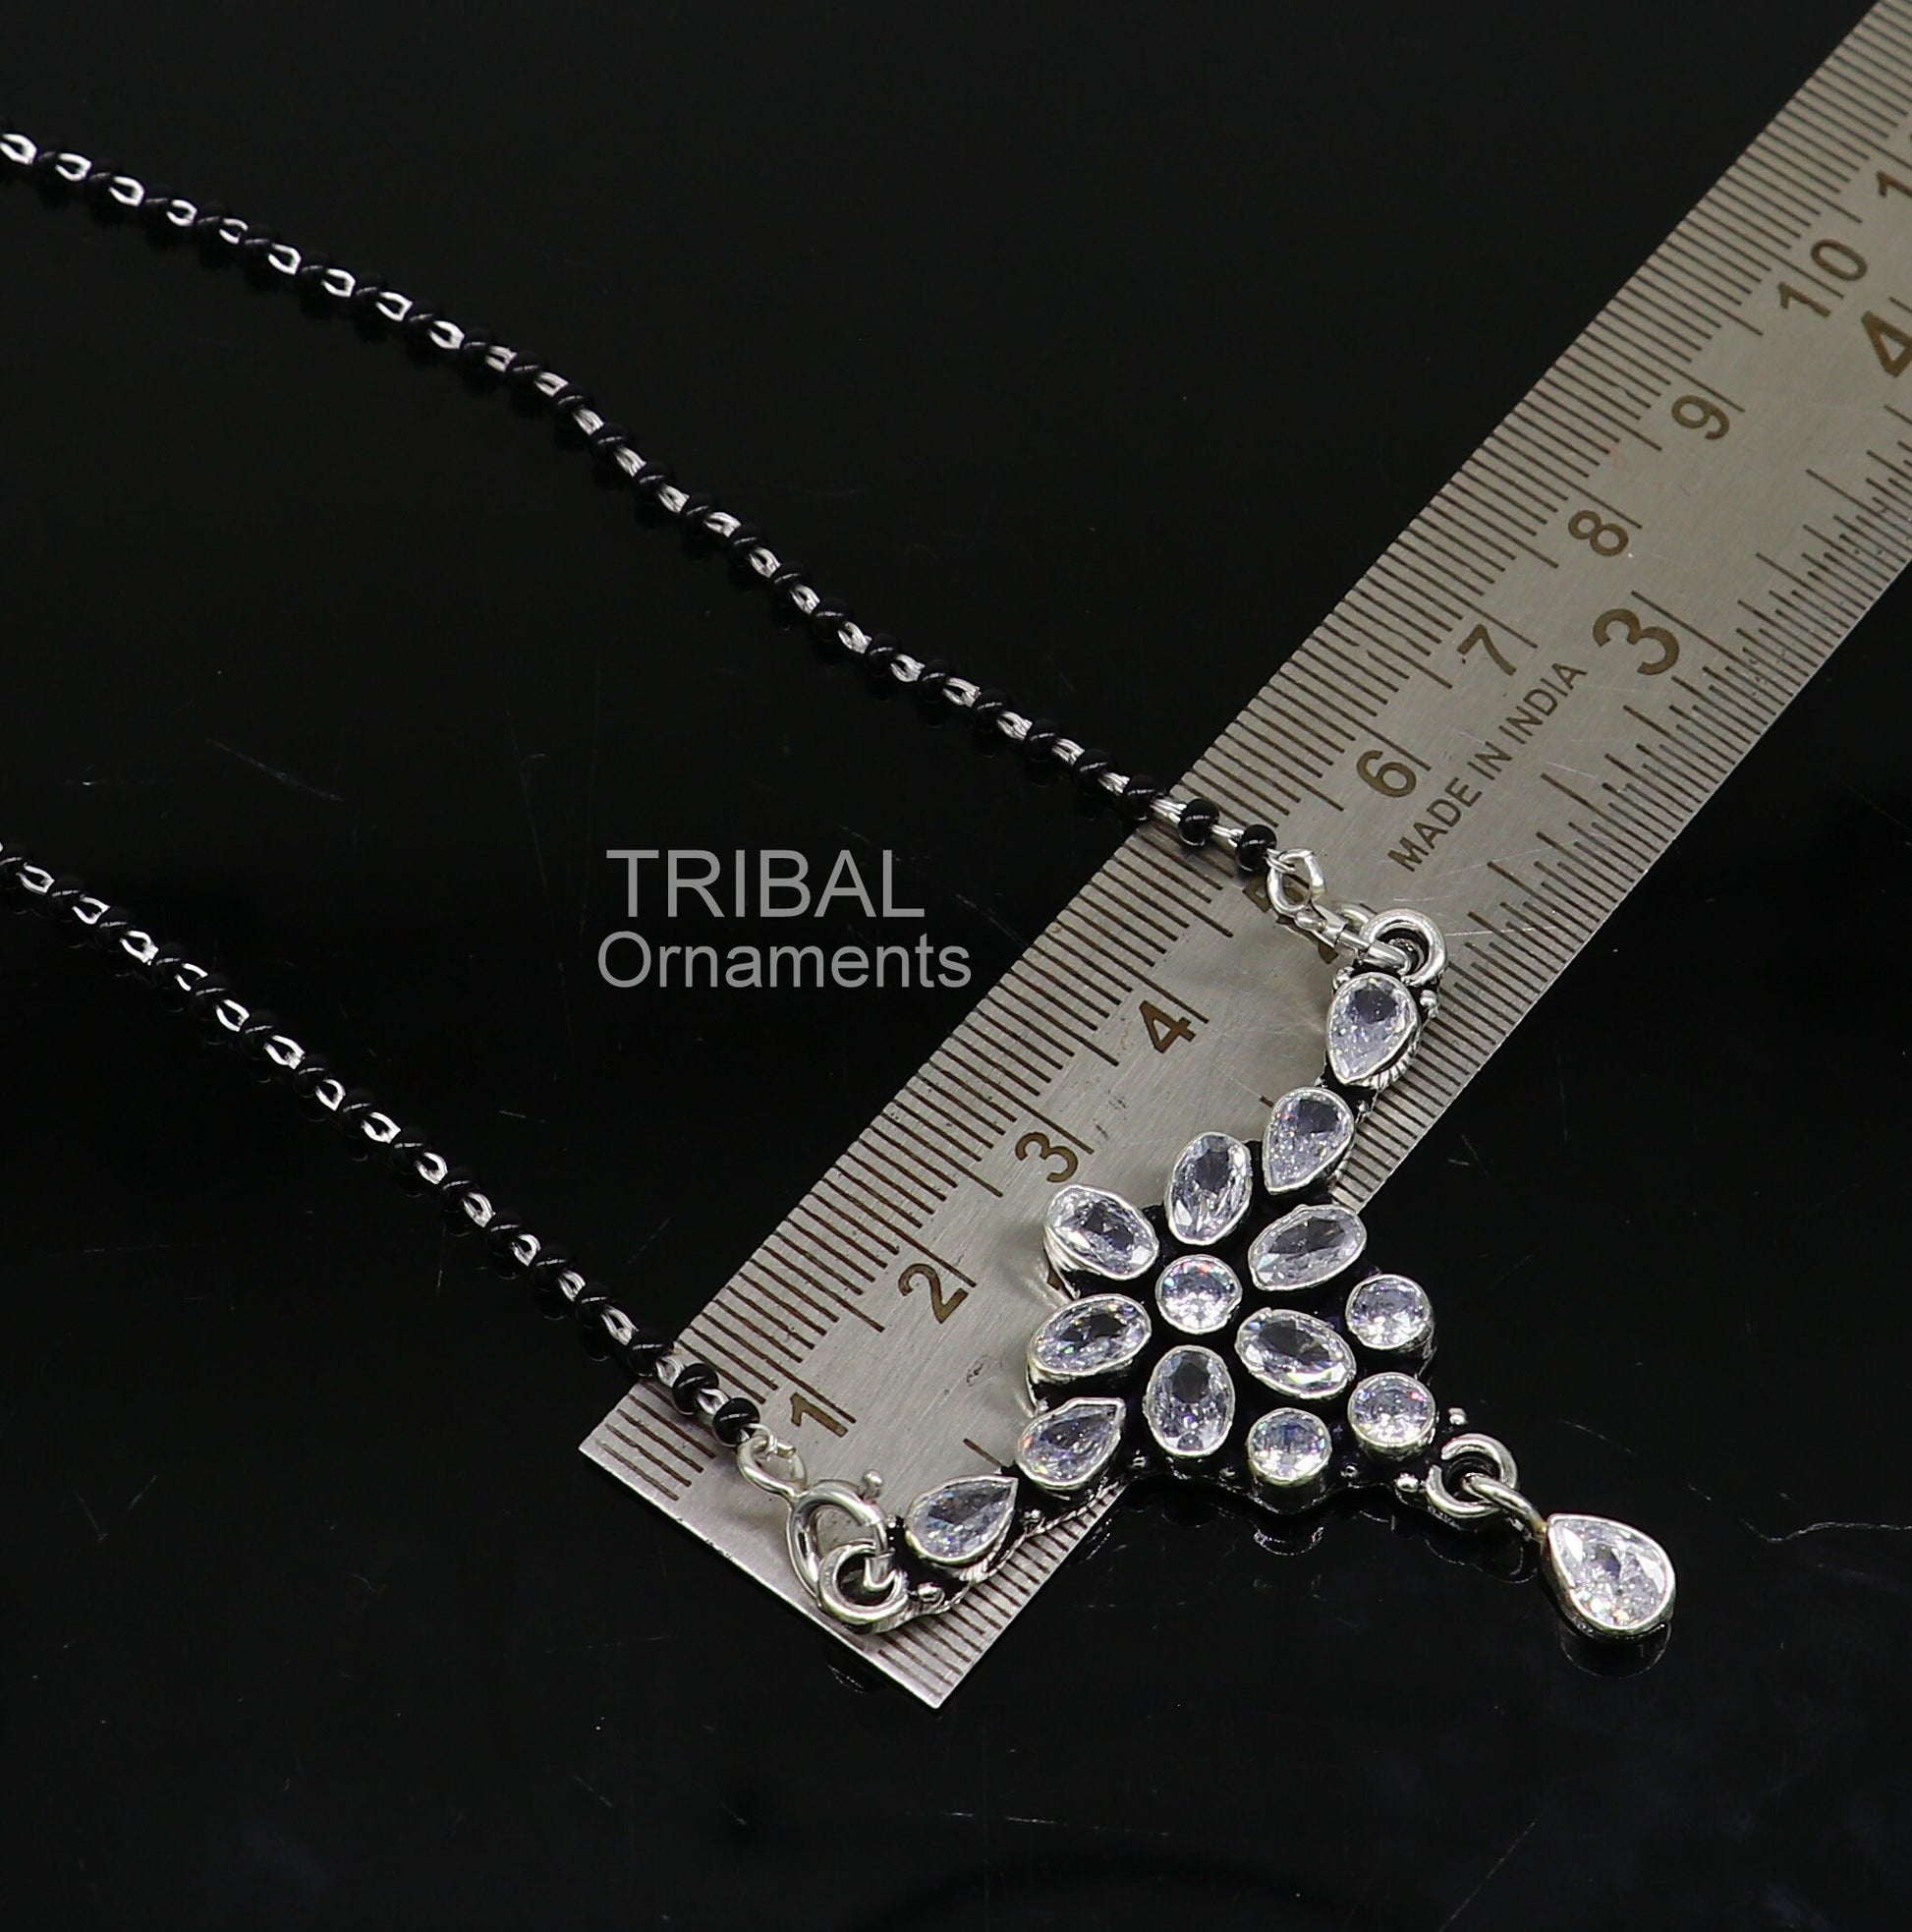 Cultural trendy style 925 sterling silver black beads mangal sutra necklace daily use brides Mangalsutra chunky necklace Mangal Sutra ms29 - TRIBAL ORNAMENTS